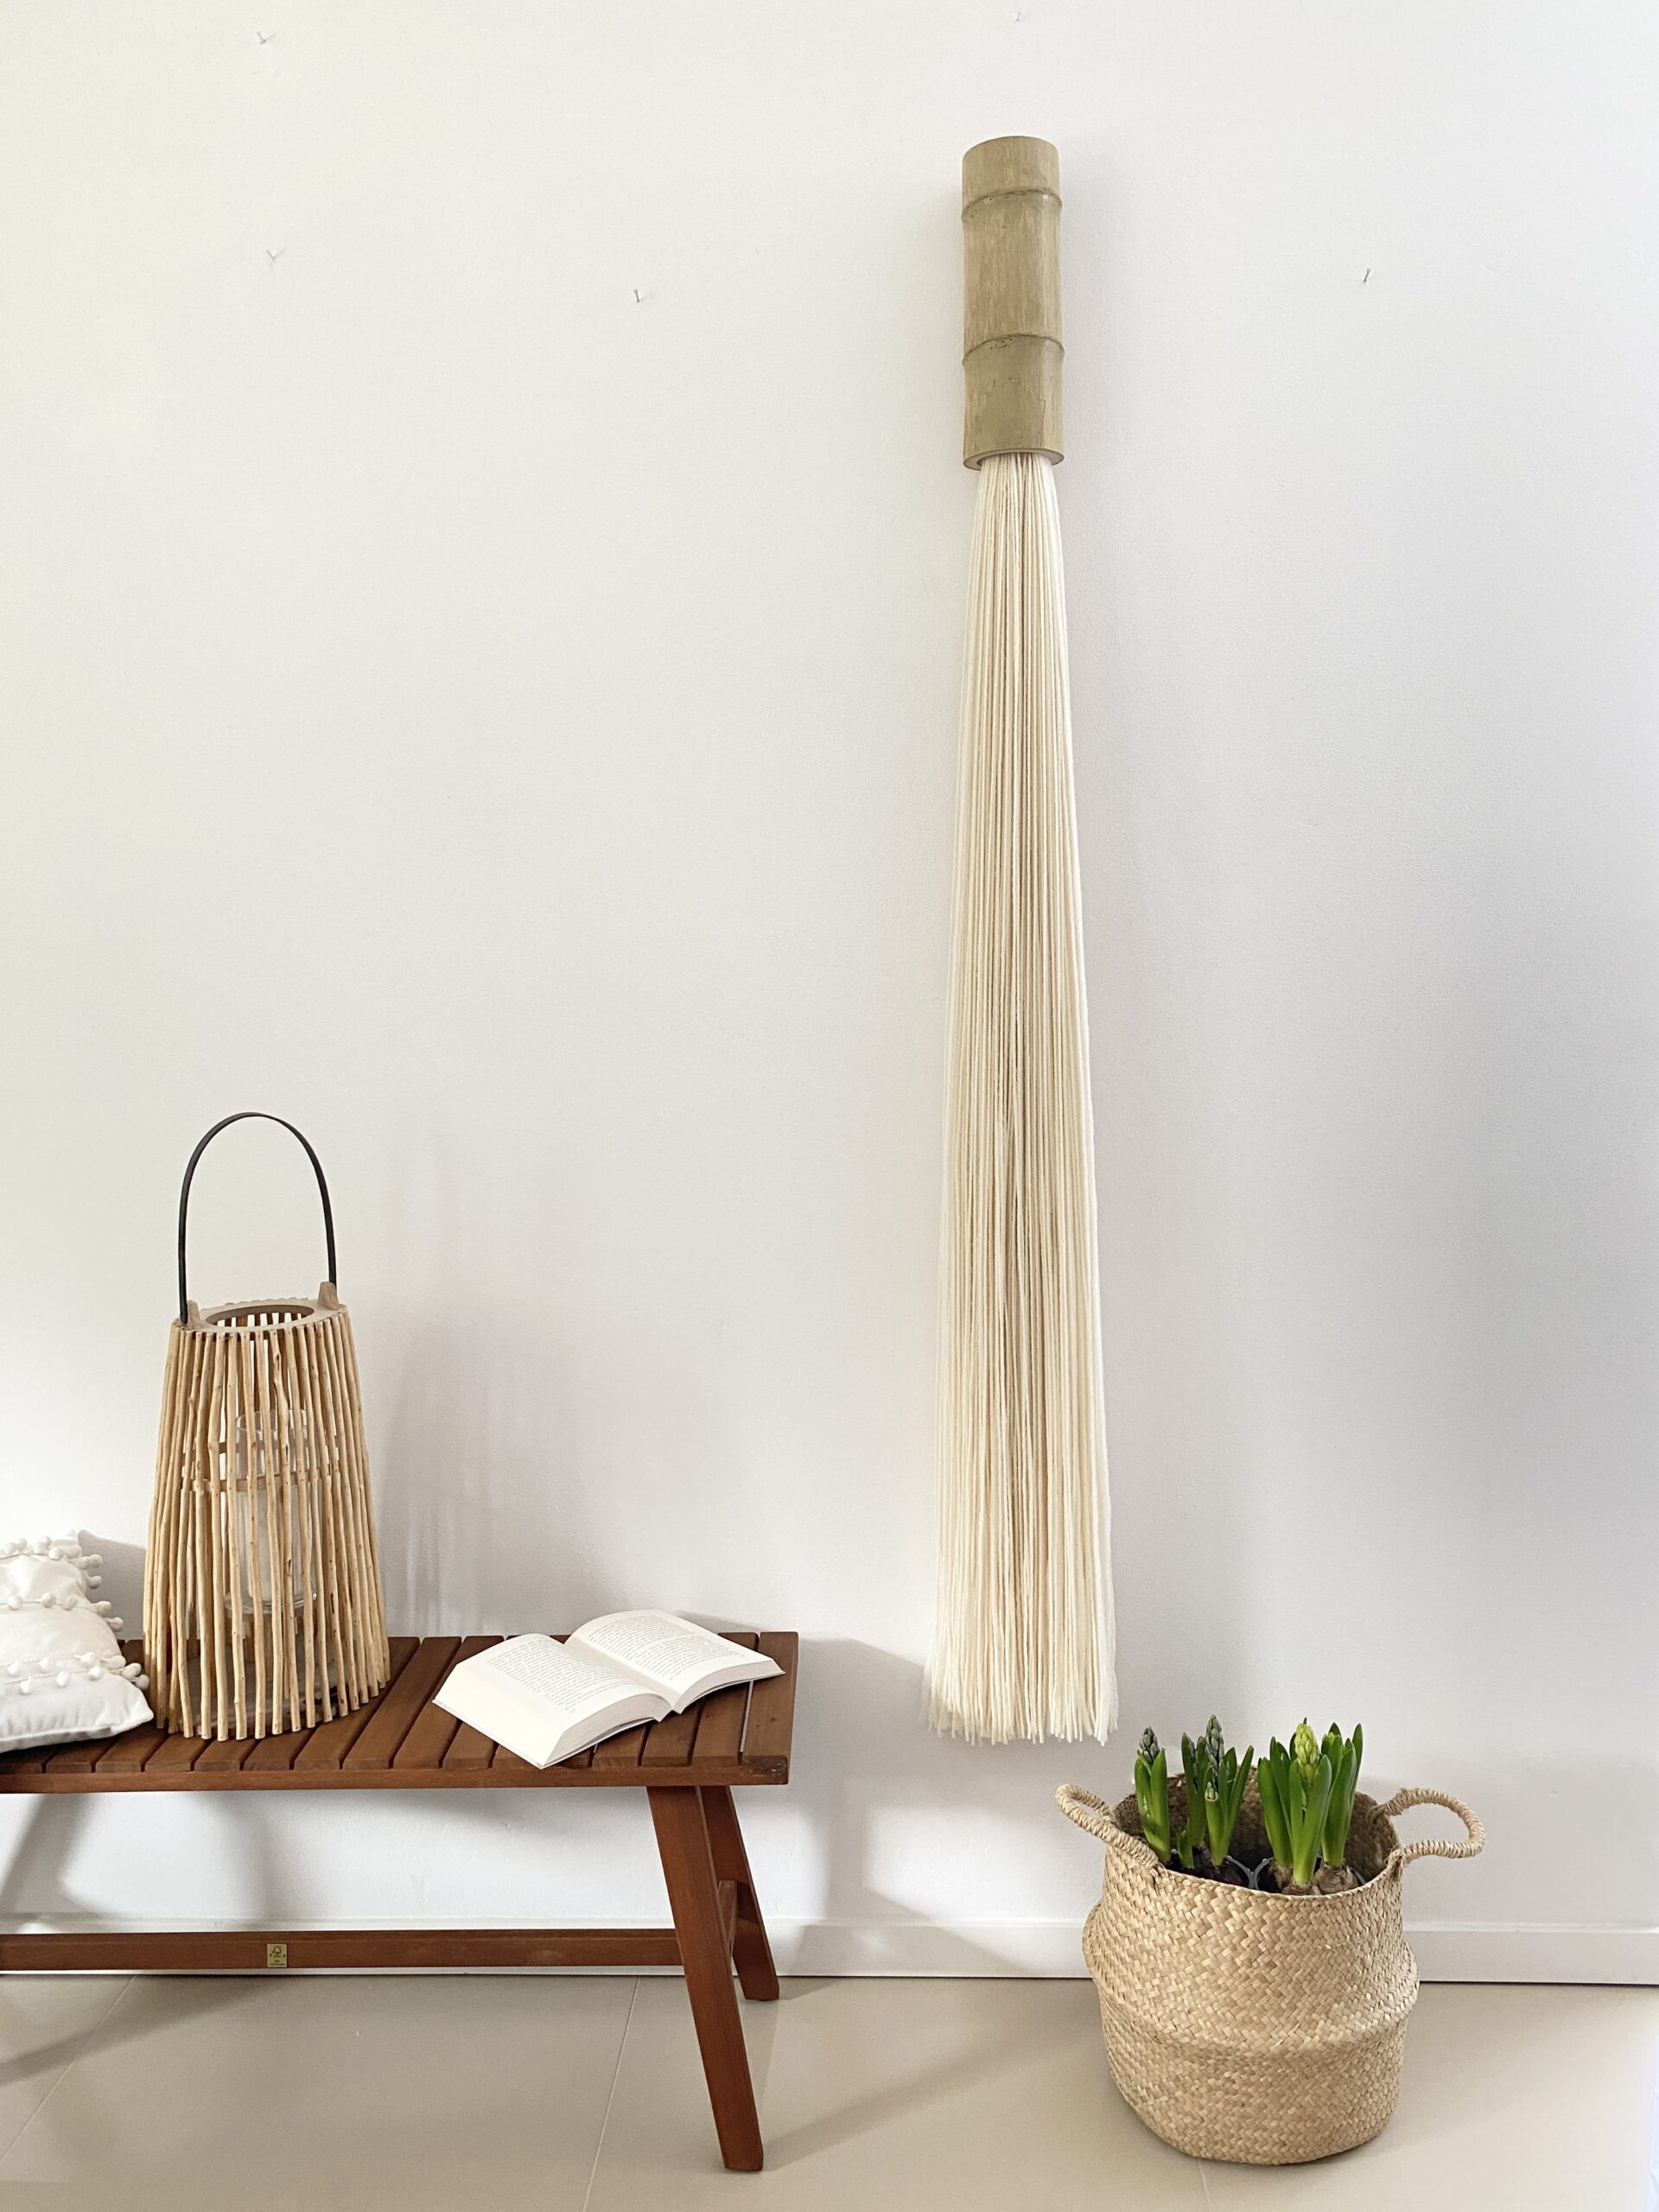 Single tassels hanging on the wall